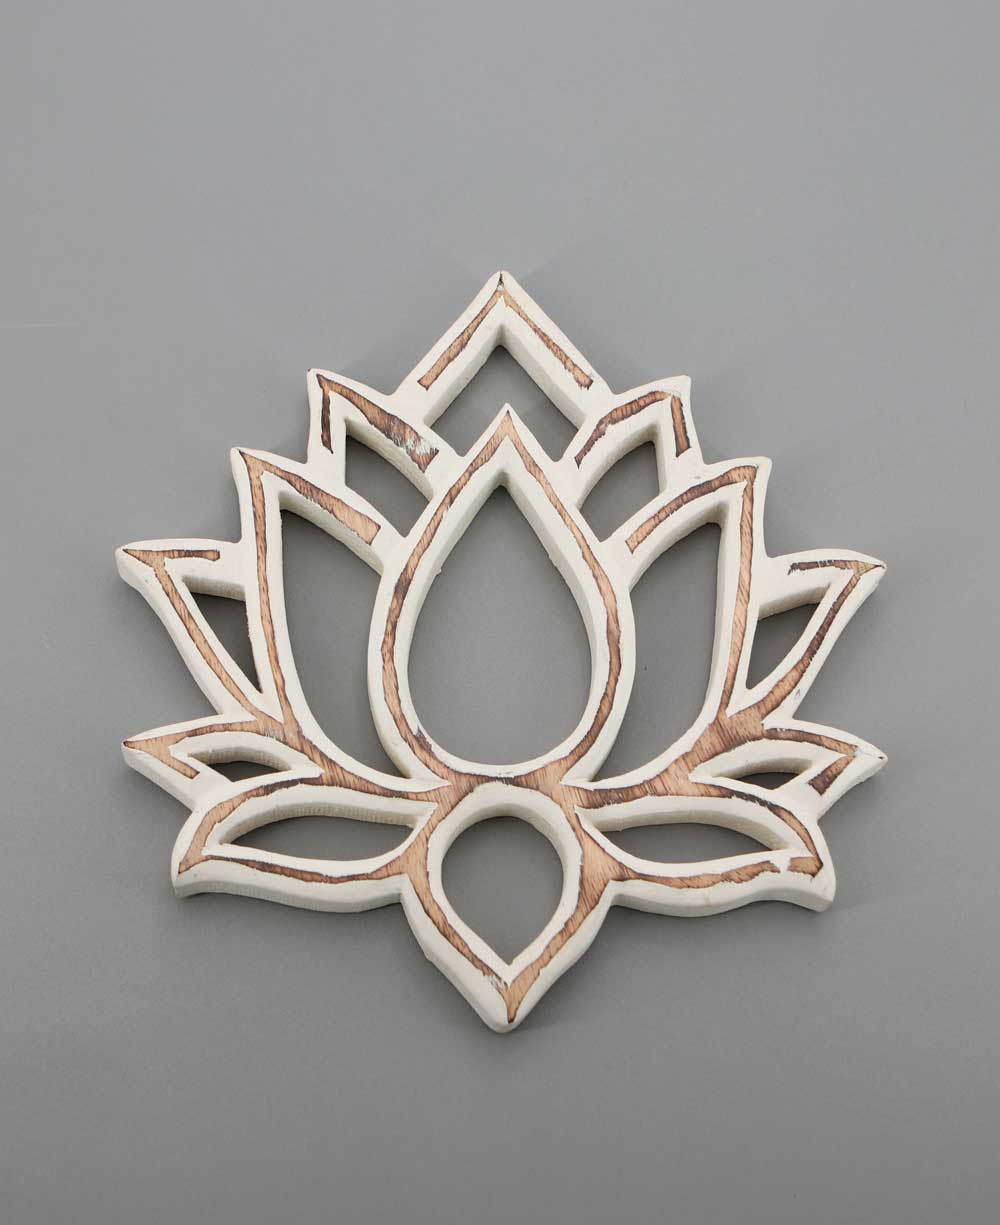 Carved Lotus Wood Trivet Or Wall Hanging, Fairtrade - Trivets